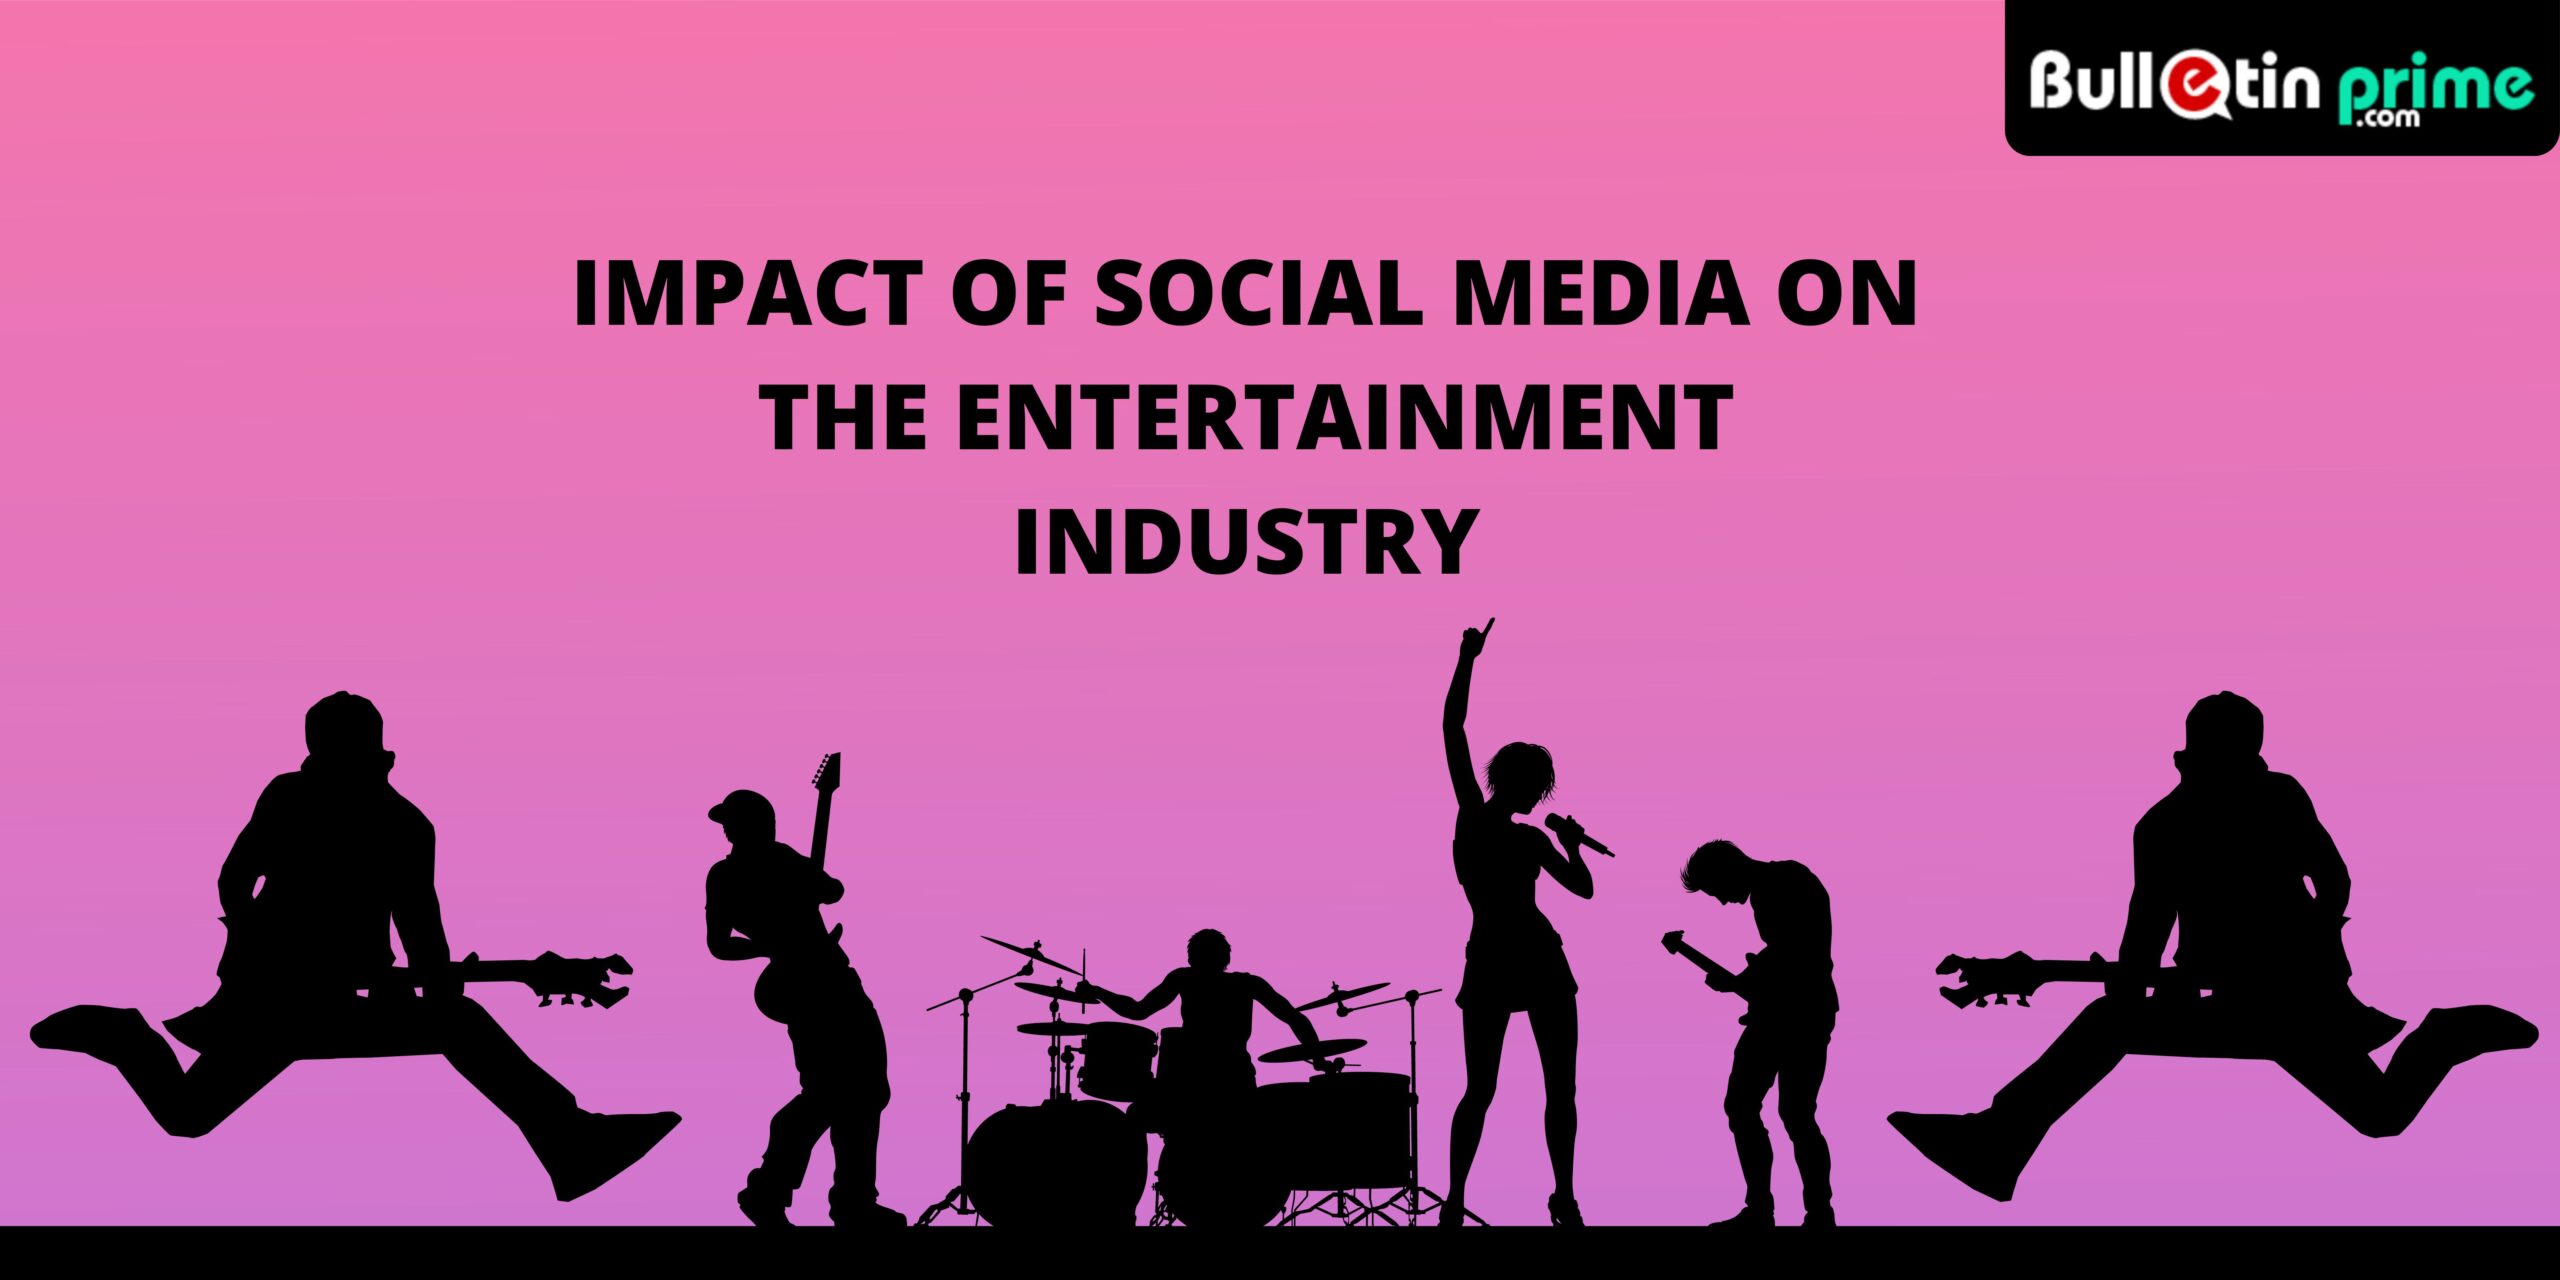 The Impact of Social Media on the Entertainment Industry